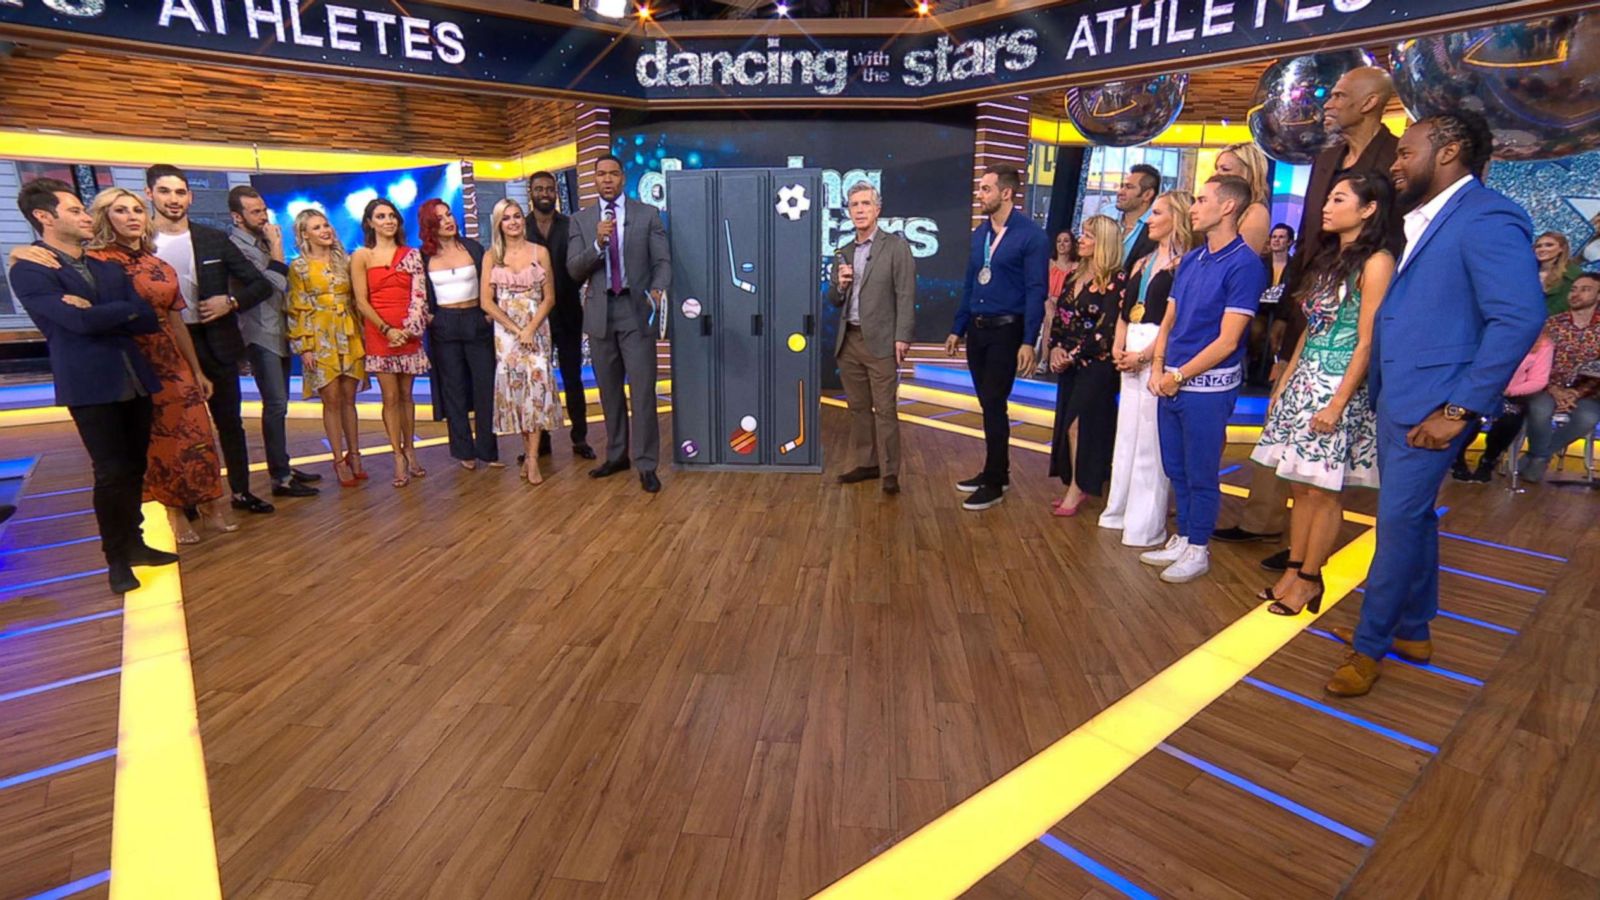 PHOTO: The "Dancing With the Stars" season 26 cast features an all-star lineup of Olympic and professional athletes.